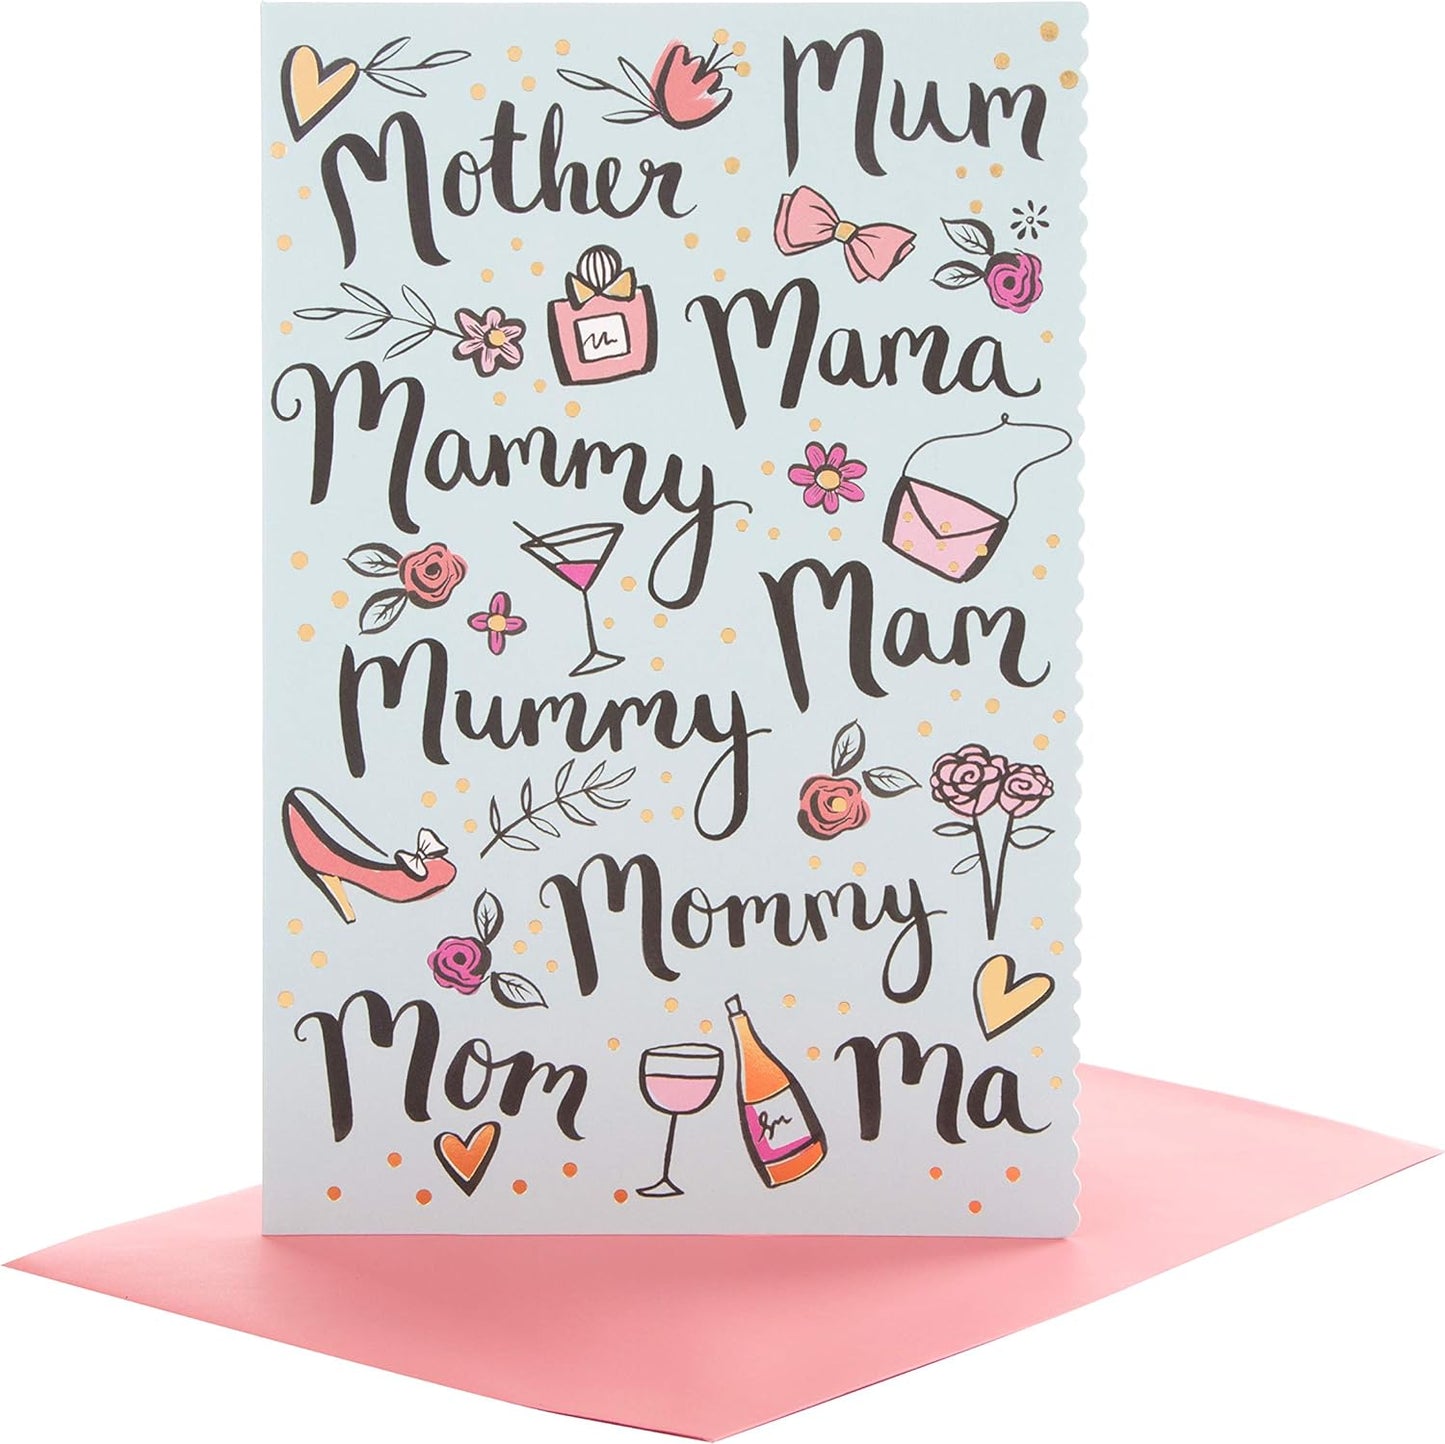 'Mum, Mother, Mama, Mammy, Mam, Mummy, Mommy, Mom, Ma' Mother's Day Card